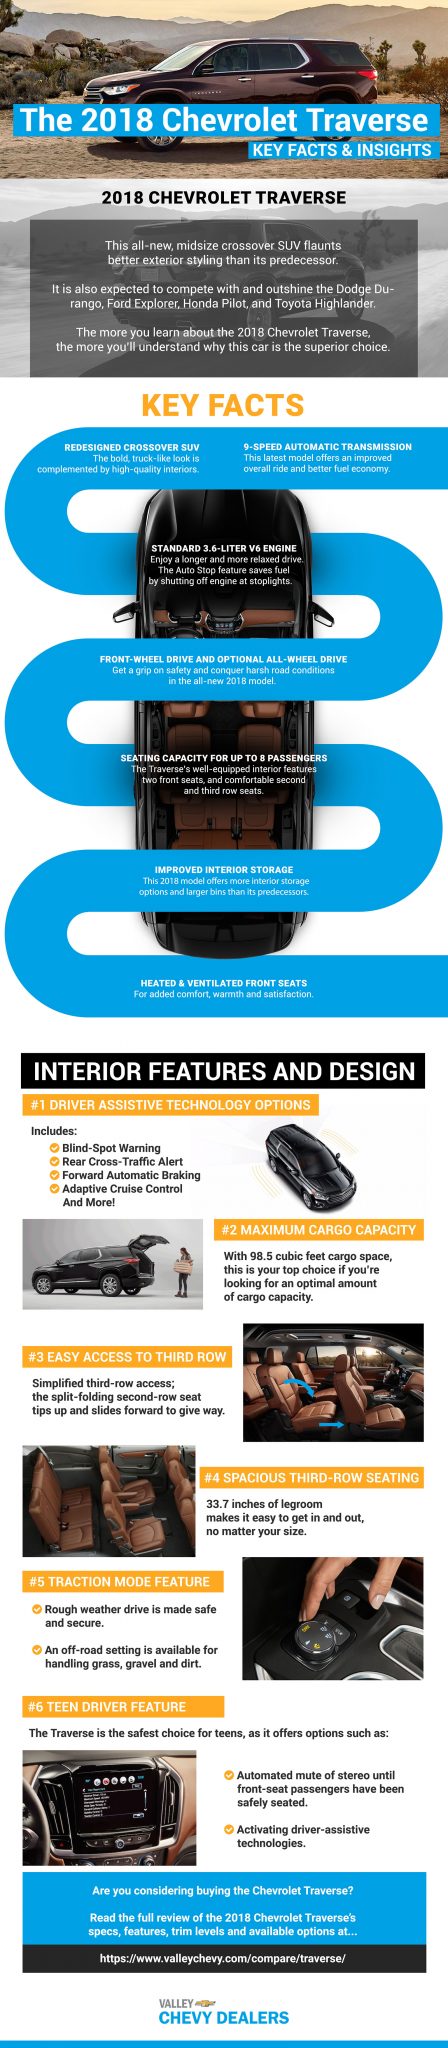 Valley Chevy - 2018 Chevrolet Traverse Facts Infographic